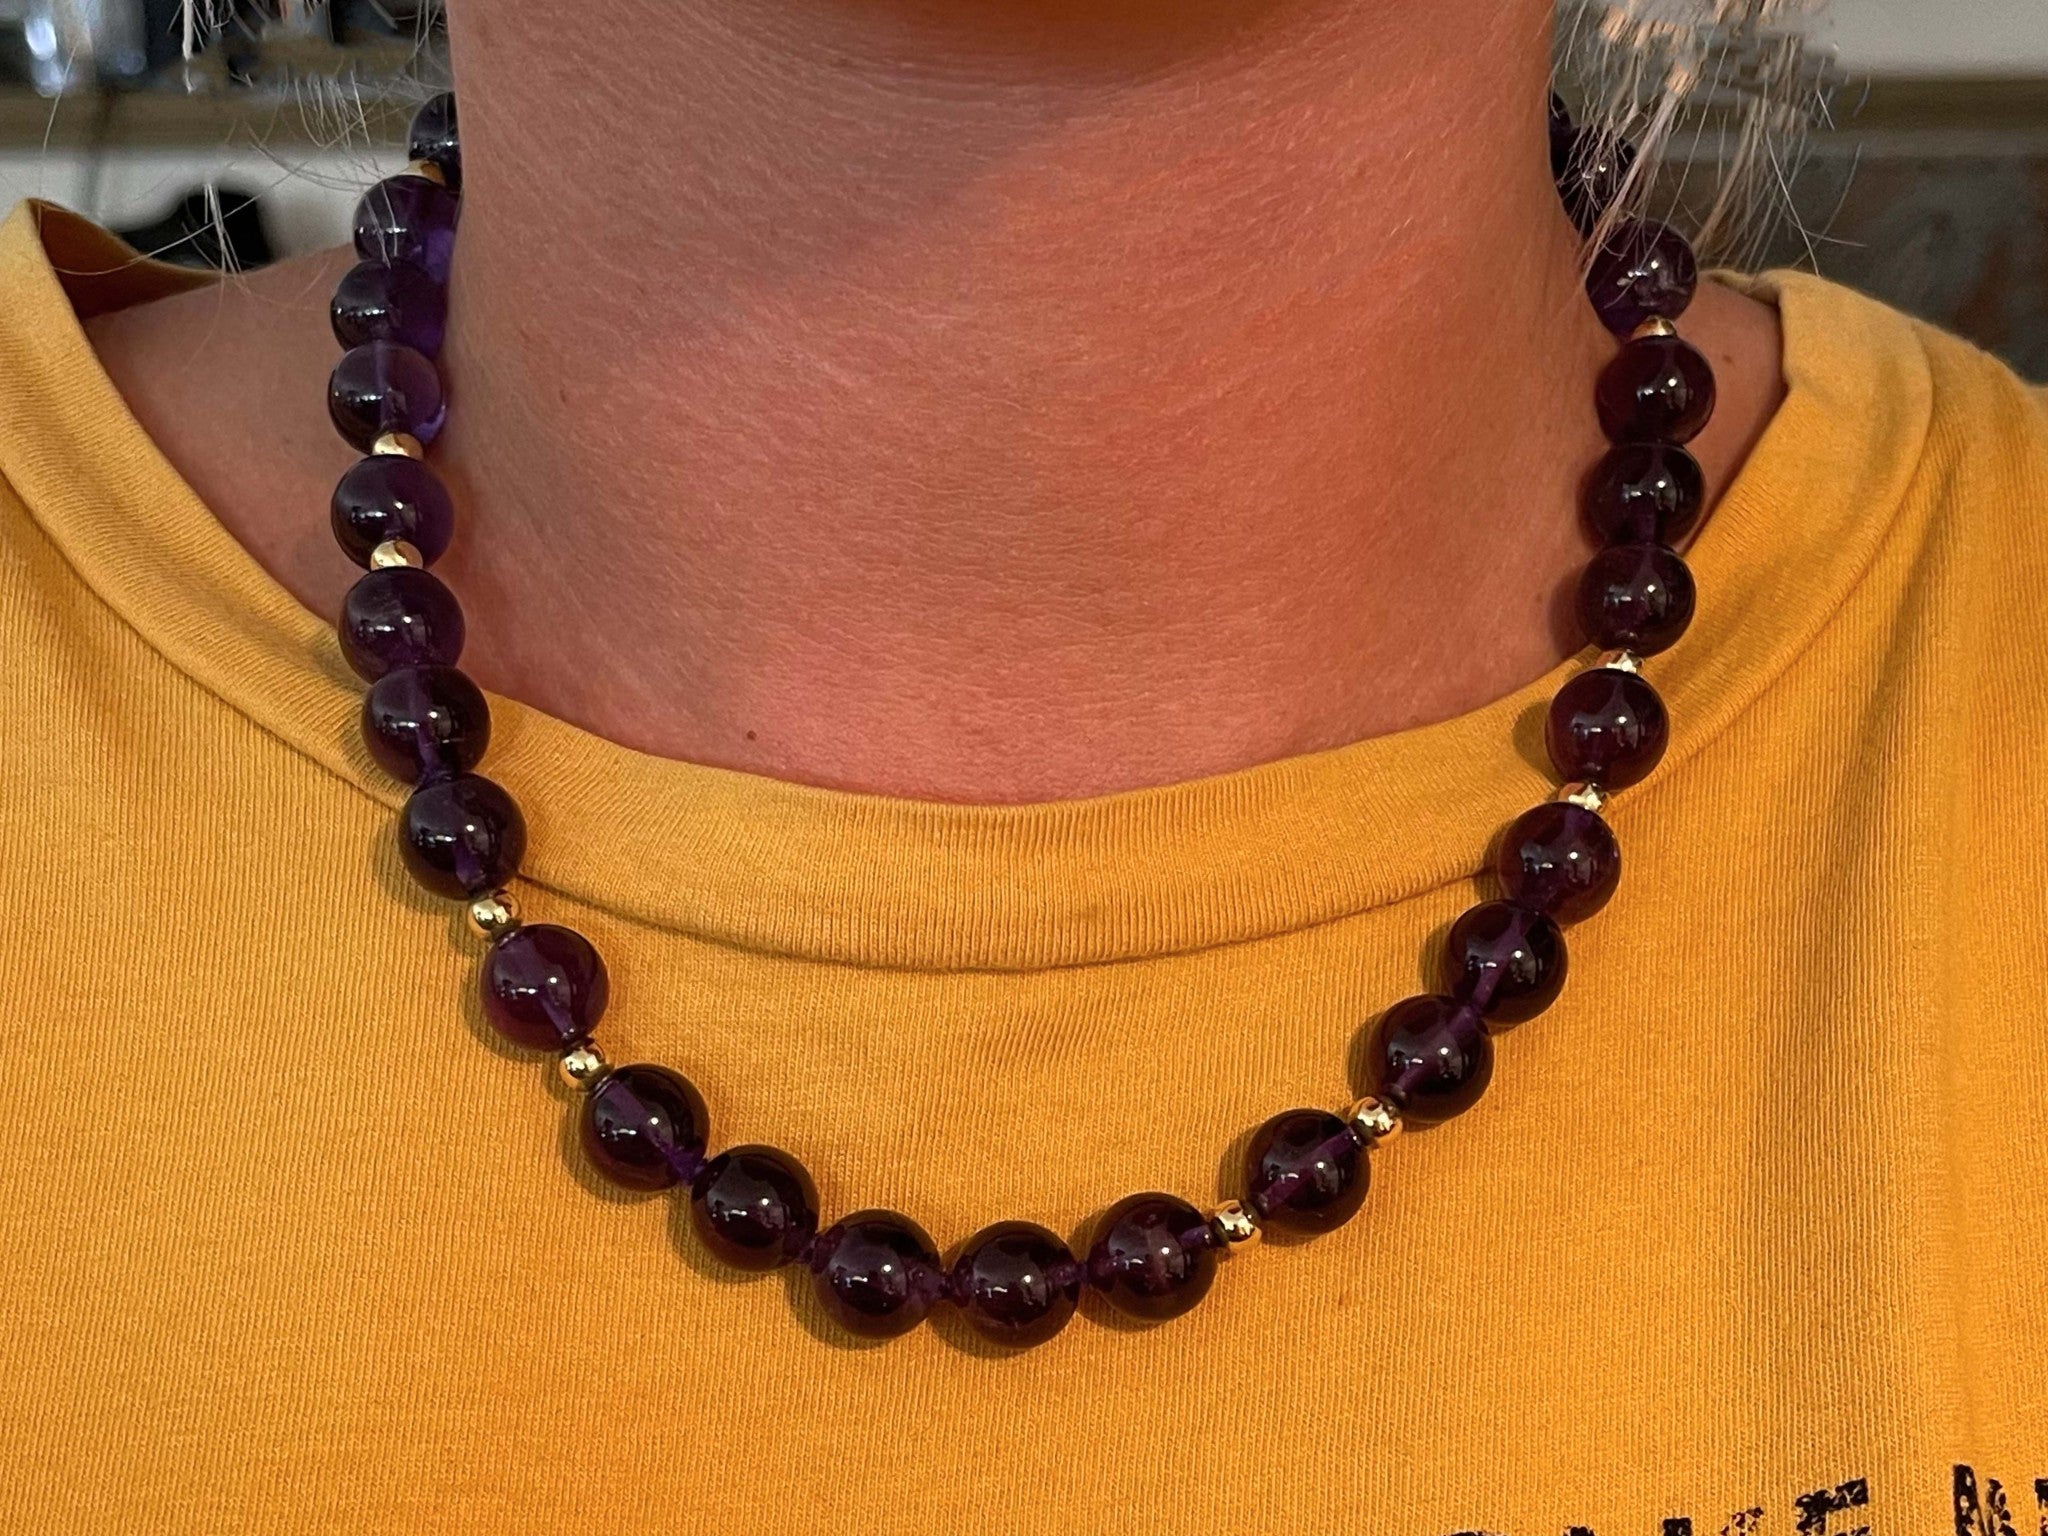 Rare Mings Hawaii Amethyst and Gold Bead Strand Necklace